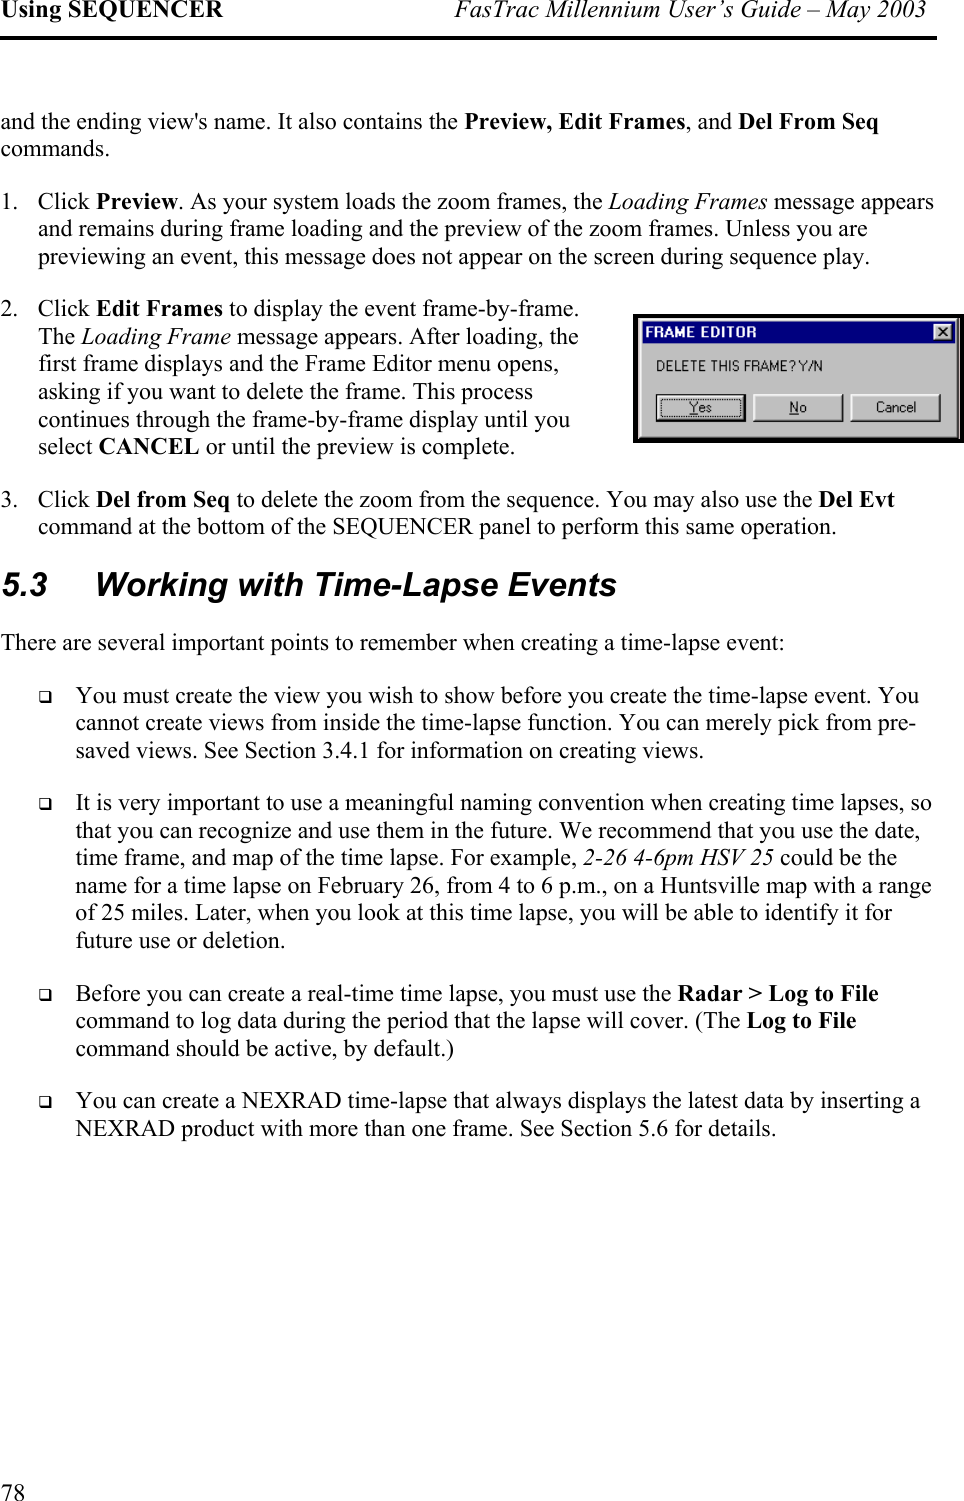 Using SEQUENCER  FasTrac Millennium User’s Guide – May 2003 and the ending view&apos;s name. It also contains the Preview, Edit Frames, and Del From Seq commands. 1.  pears previewing an event, this message does not appear on the screen during sequence play.  2. e s, you select CANCEL or until the preview is complete.  3.   Evt command at the bottom of the SEQUENCER panel to perform this same operation.  5.3  Working with Time-Lapse Events There are several important points to remember when creating a time-lapse event:  erely pick from pre-saved views. See Section 3.4.1 for information on creating views.    , ge n you look at this time lapse, you will be able to identify it for future use or deletion.   e at the lapse will cover. (The Log to File command should be active, by default.)   by inserting a NEXRAD product with more than one frame. See Section 5.6 for details. Click Preview. As your system loads the zoom frames, the Loading Frames message apand remains during frame loading and the preview of the zoom frames. Unless you are Click Edit Frames to display the event frame-by-frame. The Loading Frame message appears. After loading, thfirst frame displays and the Frame Editor menu openasking if you want to delete the frame. This process continues through the frame-by-frame display until Click Del from Seq to delete the zoom from the sequence. You may also use the DelYou must create the view you wish to show before you create the time-lapse event. You cannot create views from inside the time-lapse function. You can mIt is very important to use a meaningful naming convention when creating time lapses, sothat you can recognize and use them in the future. We recommend that you use the datetime frame, and map of the time lapse. For example, 2-26 4-6pm HSV 25 could be the name for a time lapse on February 26, from 4 to 6 p.m., on a Huntsville map with a ranof 25 miles. Later, wheBefore you can create a real-time time lapse, you must use the Radar &gt; Log to Filcommand to log data during the period thYou can create a NEXRAD time-lapse that always displays the latest data 78 